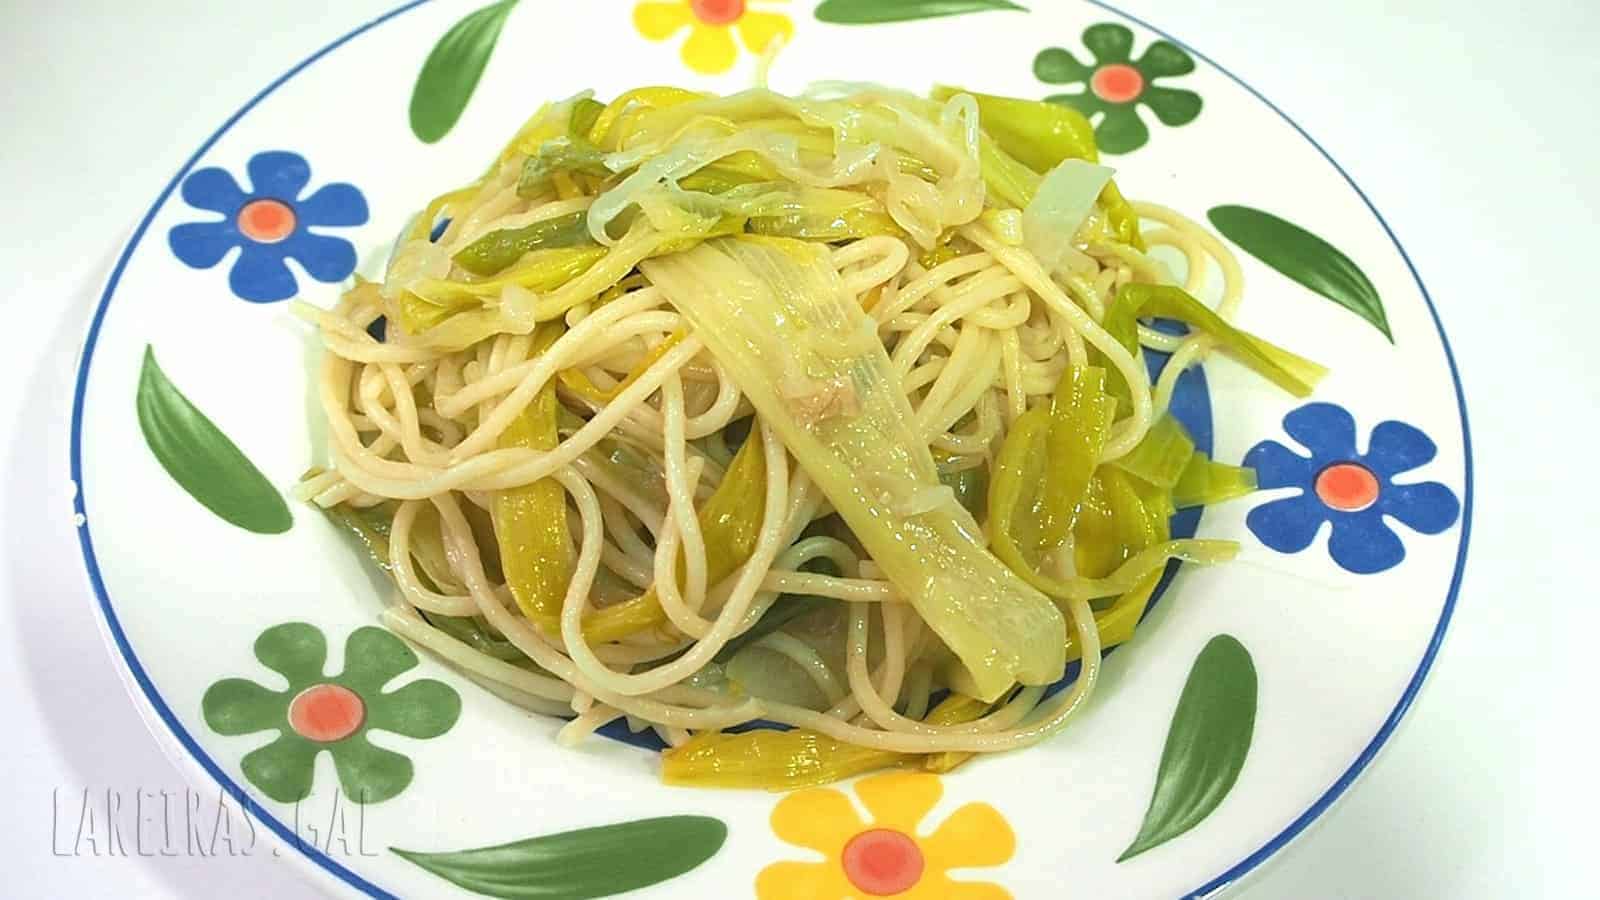 Spaghetti with vegetables